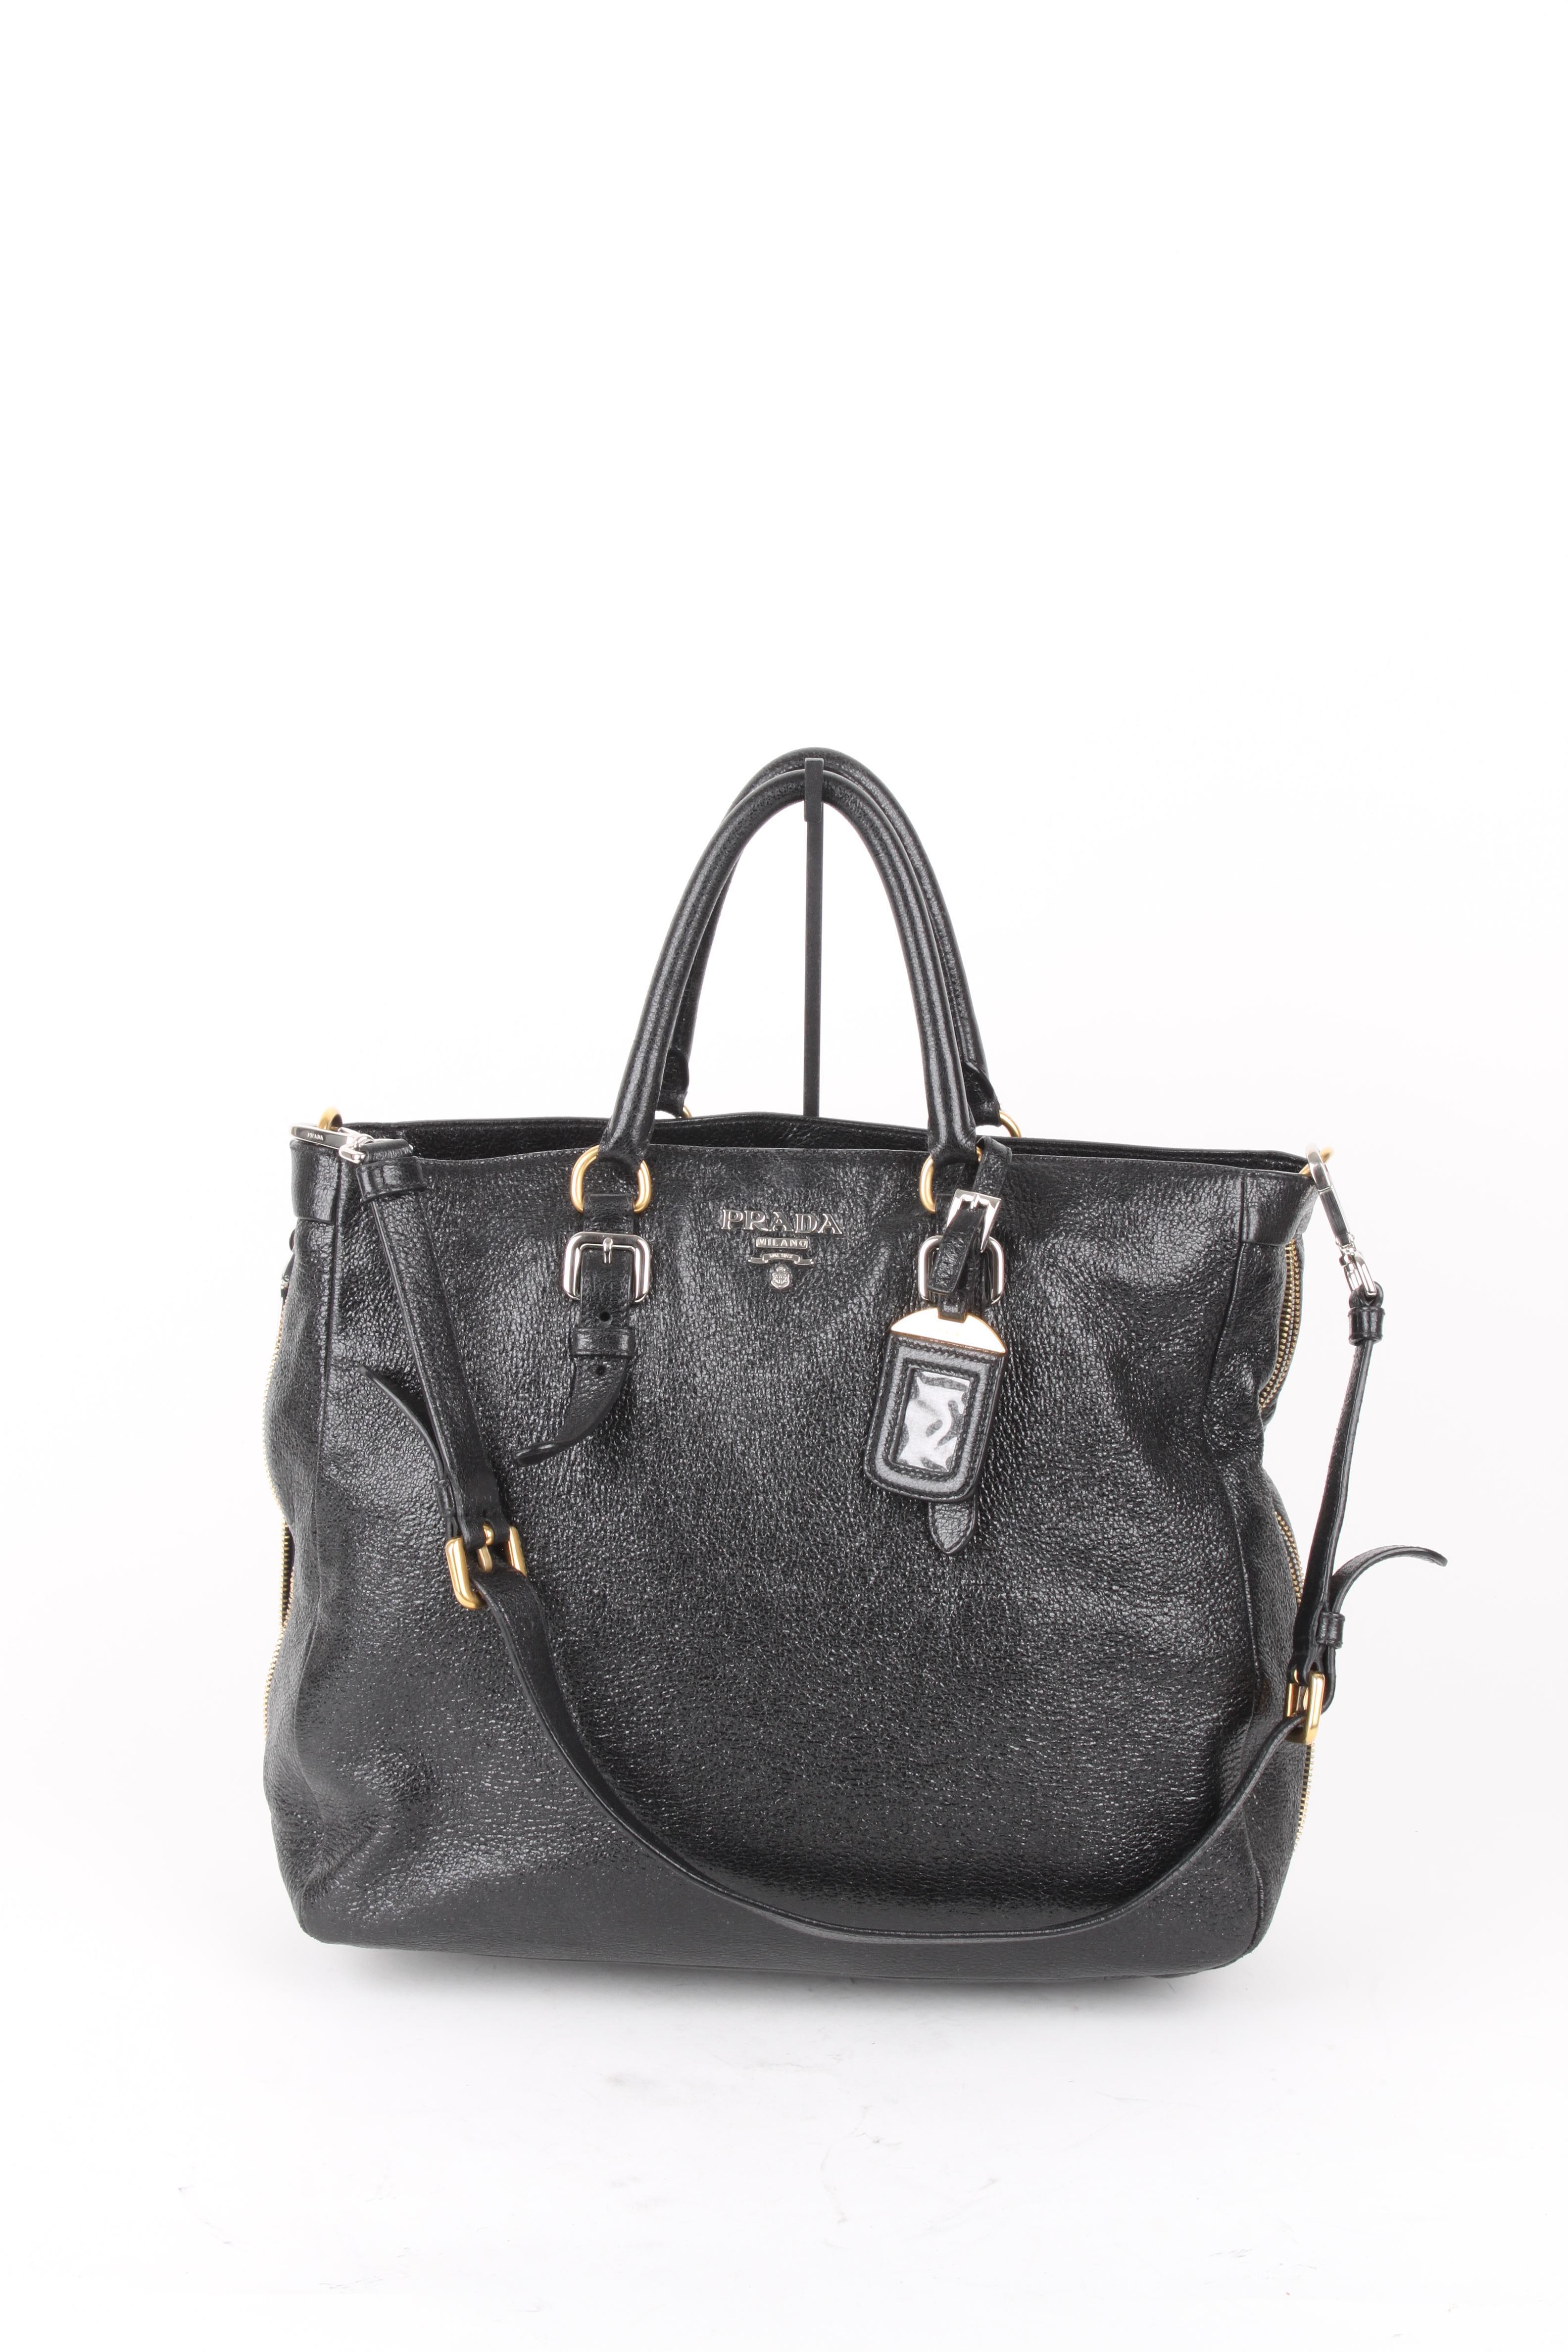 Prada Black Leather Crossbody Phenix Shopper Tote.

This little bag makes a big statement. It features a leather exterior with matching black leather handles. The bag features a black silk lining, zipper closure, one main compartment and two side